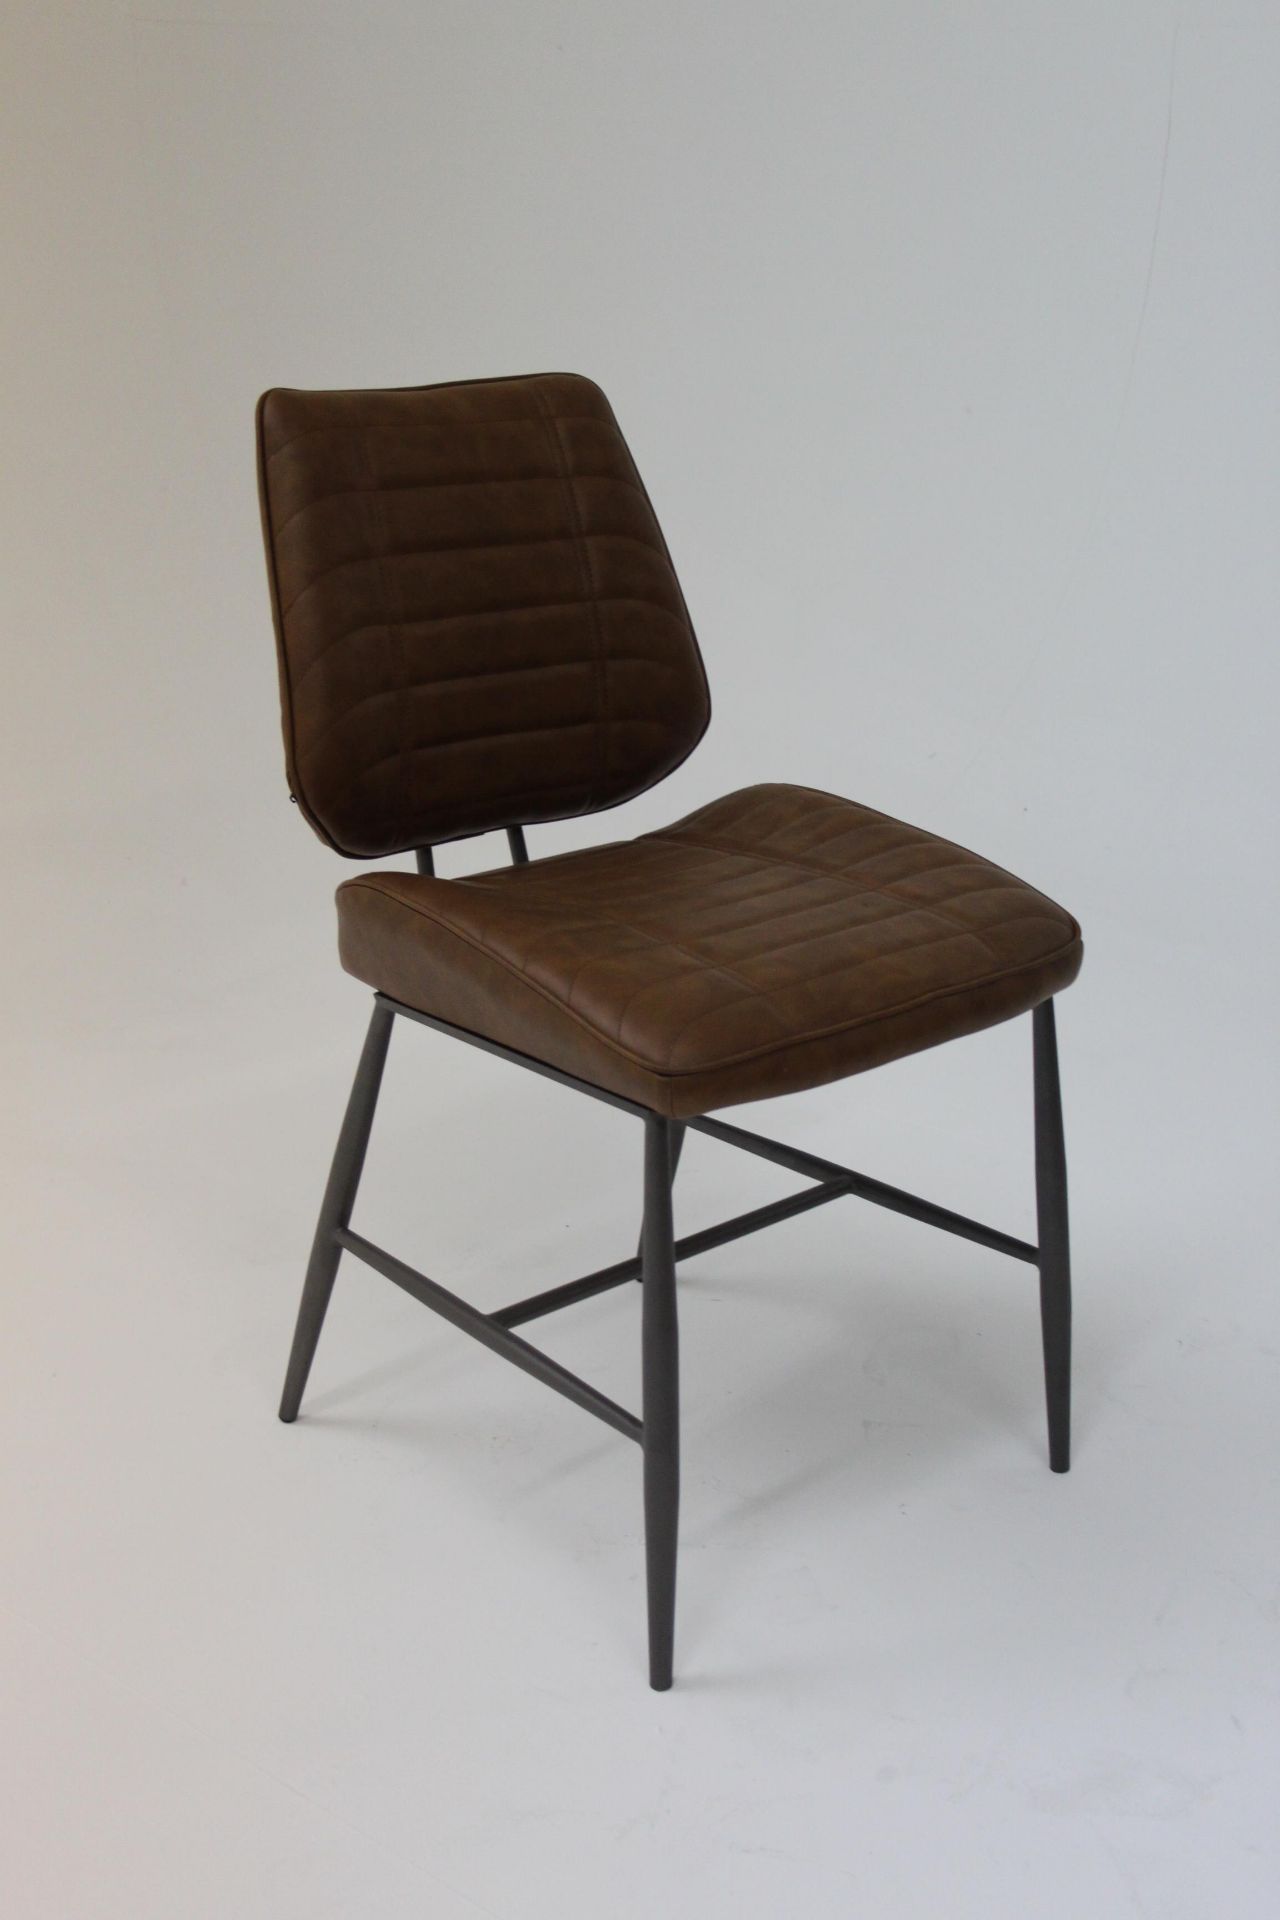 Cortina Chair Tan Inspired By Classic Car Seat Design These Chairs A Modern Stylish Appeal High - Image 5 of 5